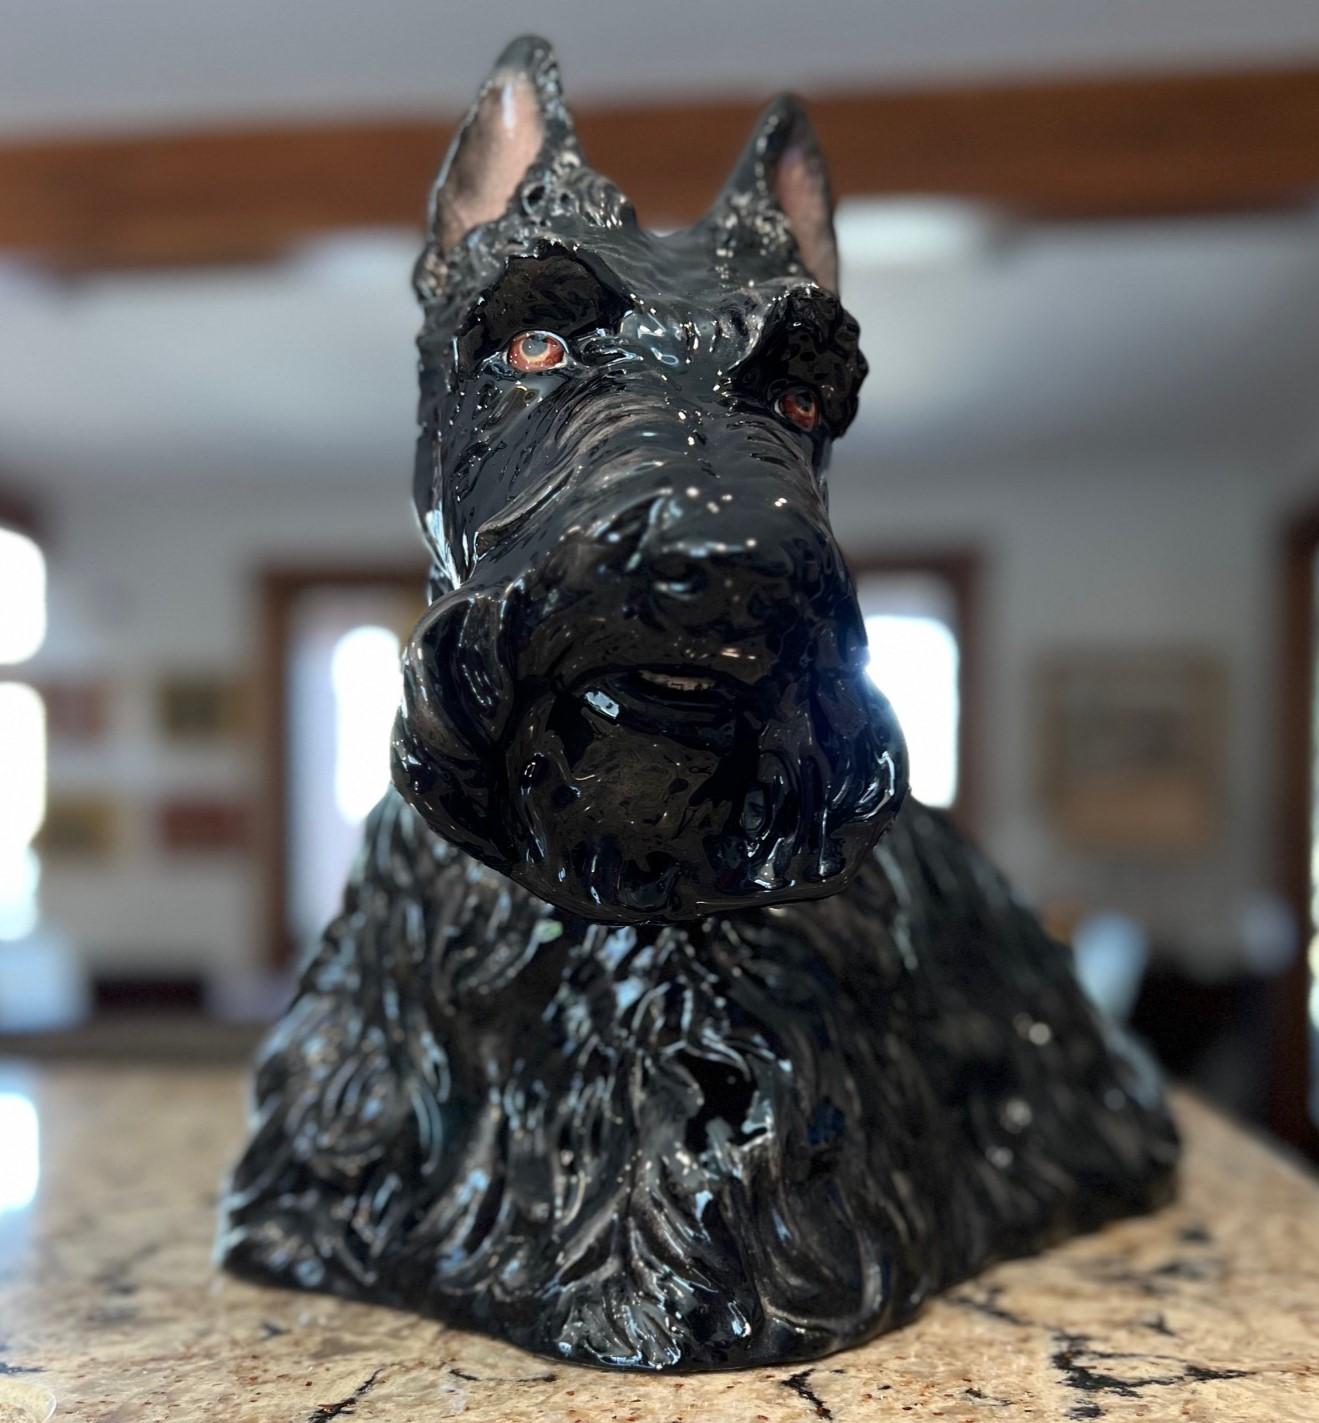 Vintage Ceramic Scottie Dog Figure - The Townsend Ceramic and Glass Co. Florida For Sale 5